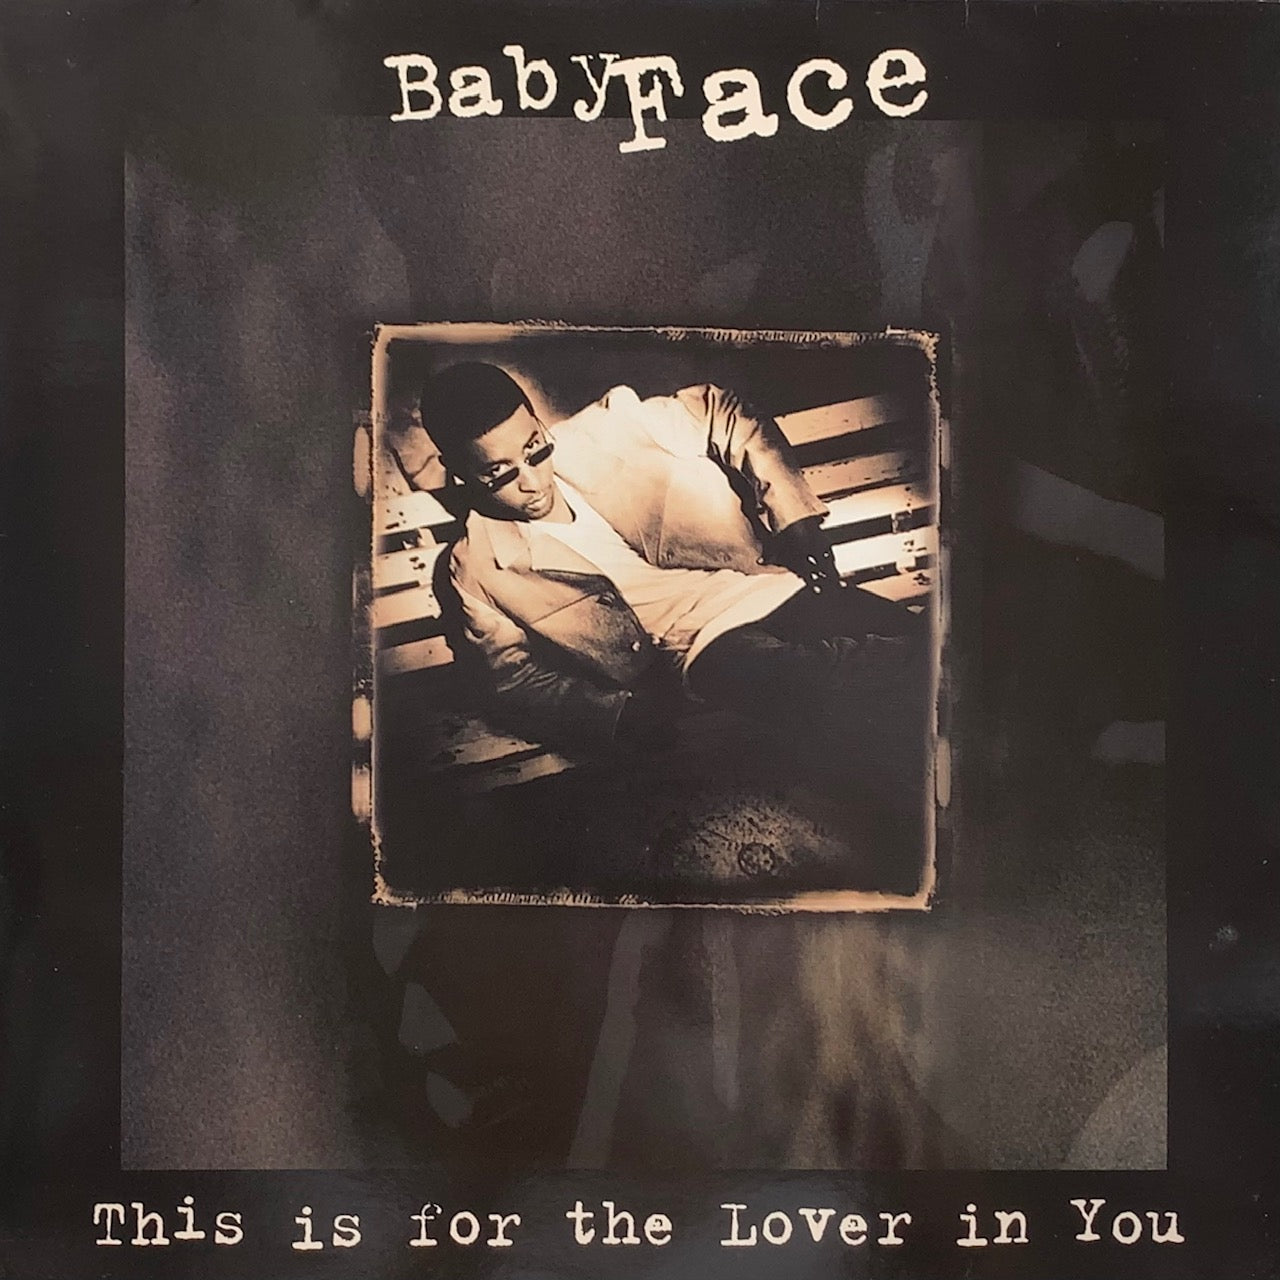 BABYFACE / This Is For The Lover In You (EPC 663765 6